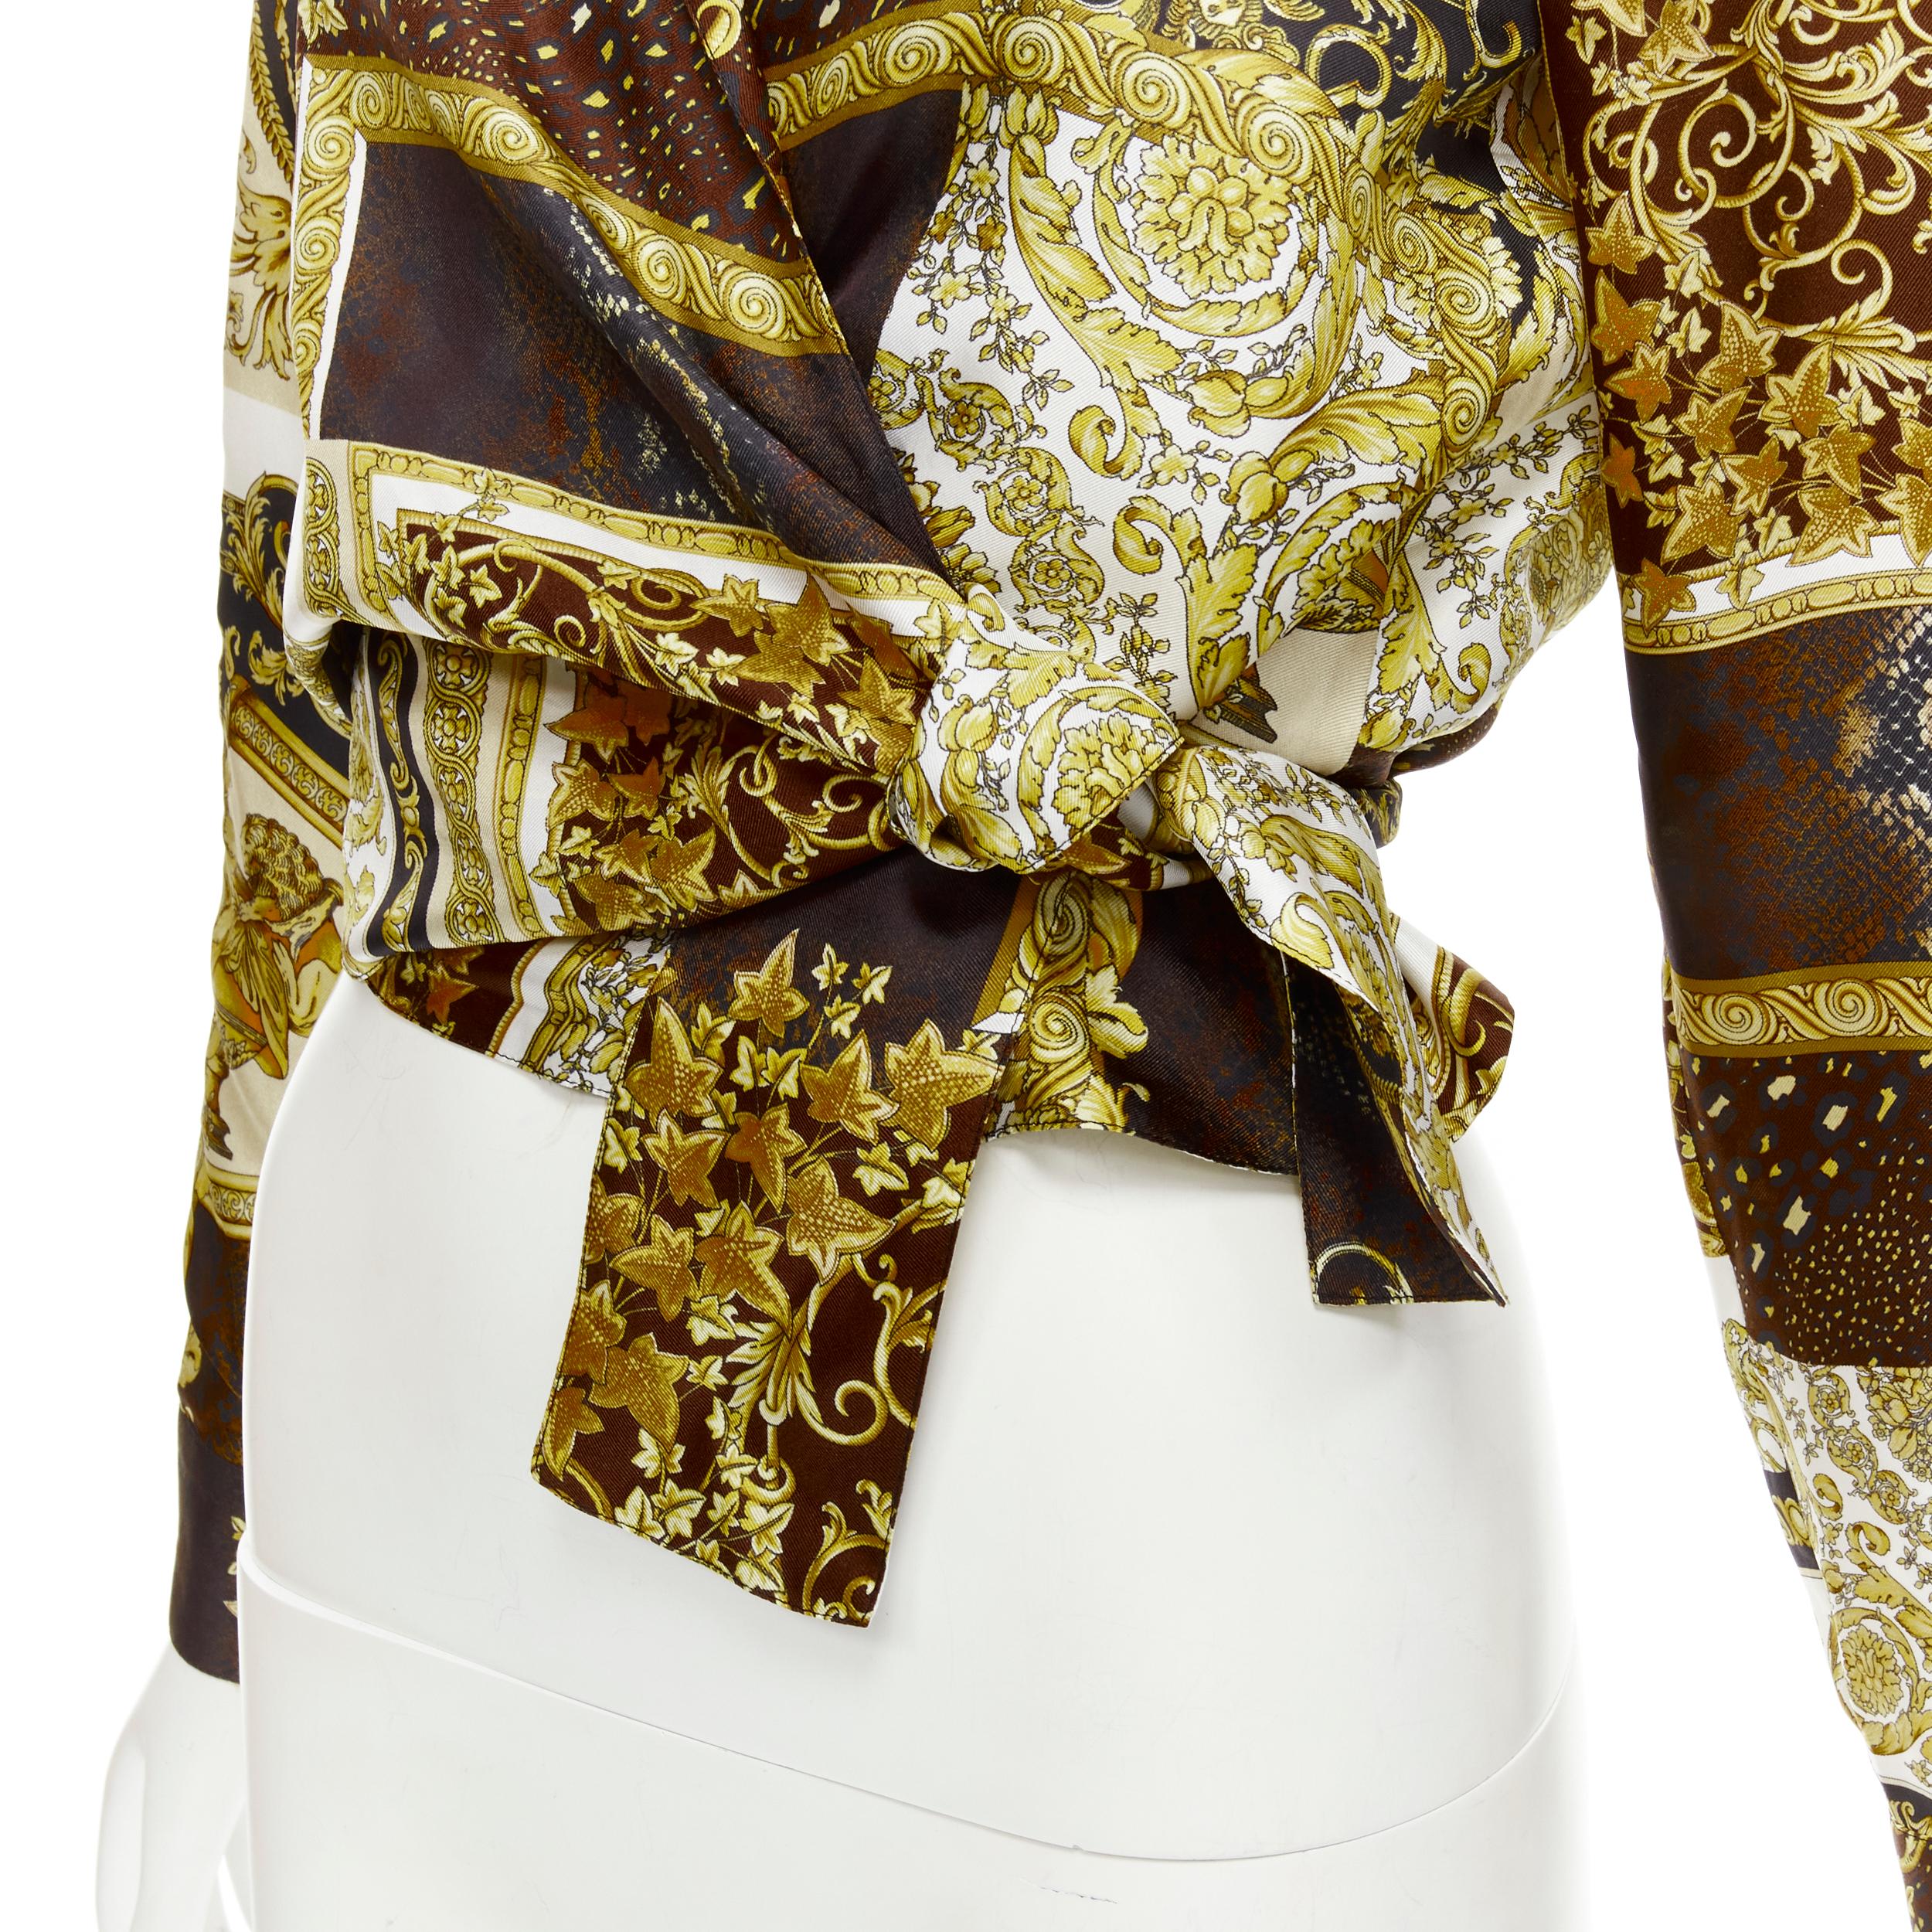 new VERSACE 2021 Mosaic Barocco 100% silk print wrap tie cropped shirt IT40 S 
Reference: TGAS/C00684 
Brand: Versace 
Designer: Donatella Versace 
Collection: Resort 2021 Runway 
Material: Silk 
Color: Gold 
Pattern: Barocco 
Closure: Tie 
Extra